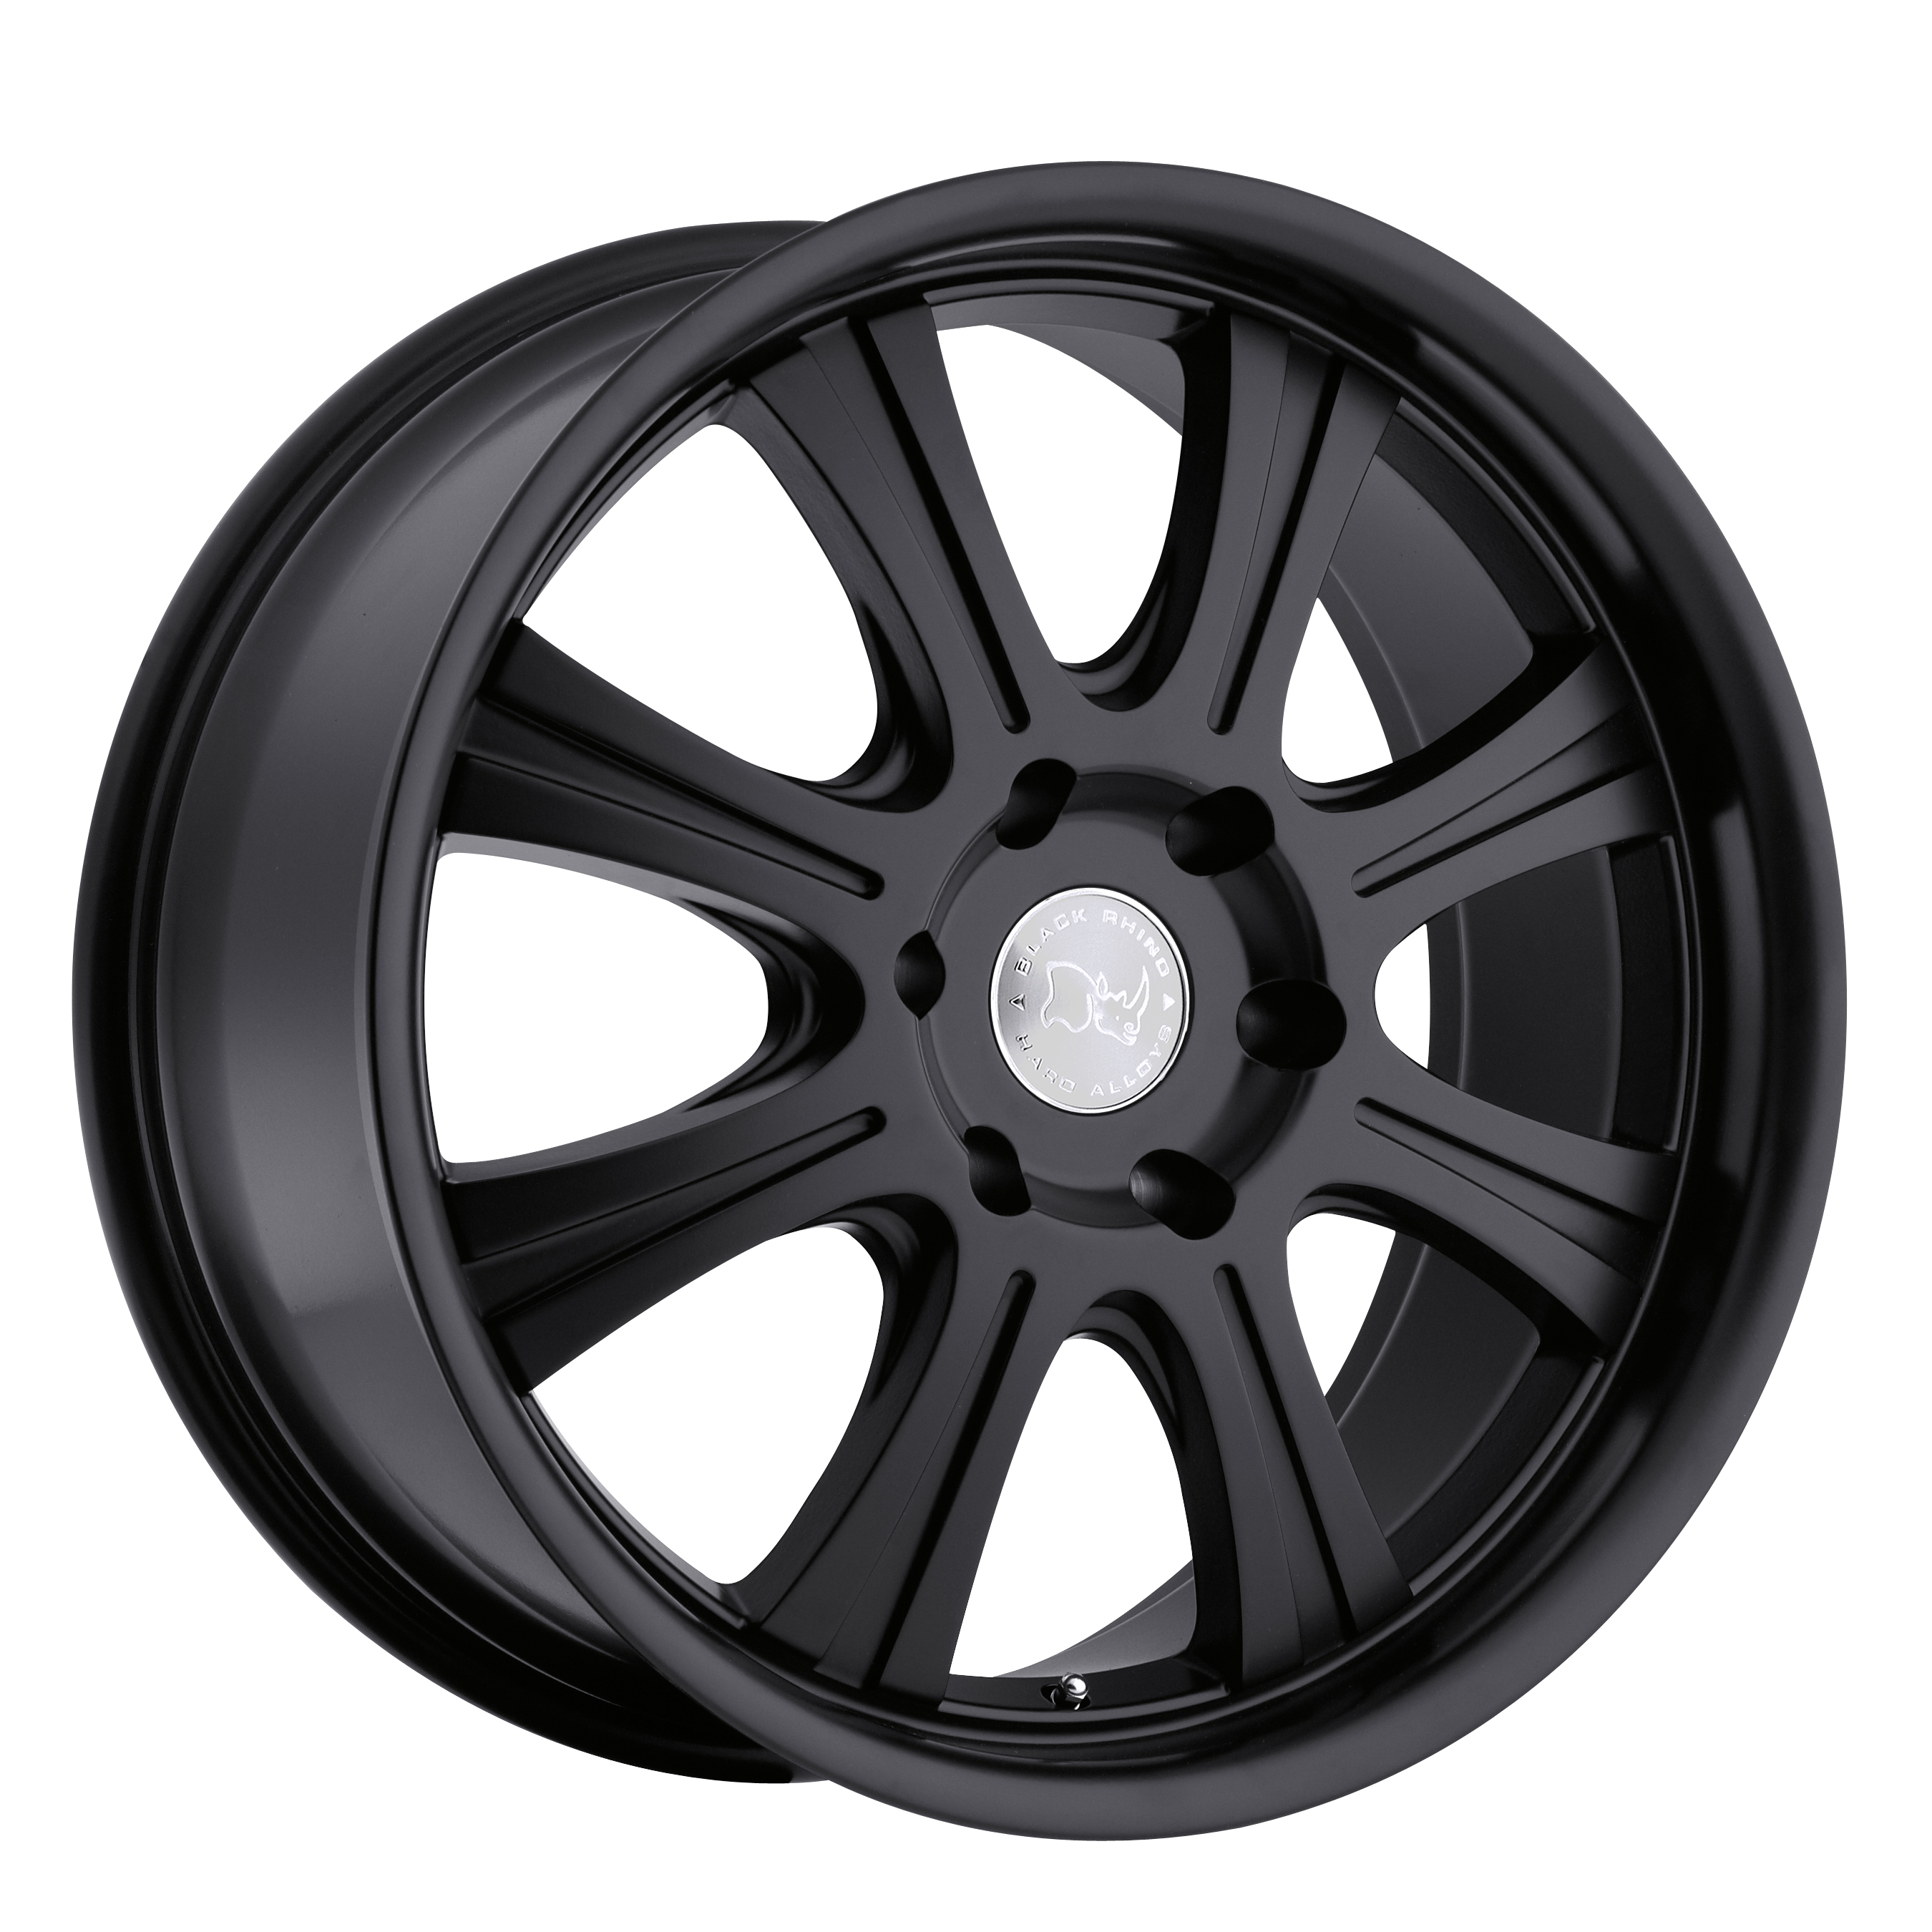 Black Rhino Wheels to Introduce Three New Truck and Offroad Wheels at